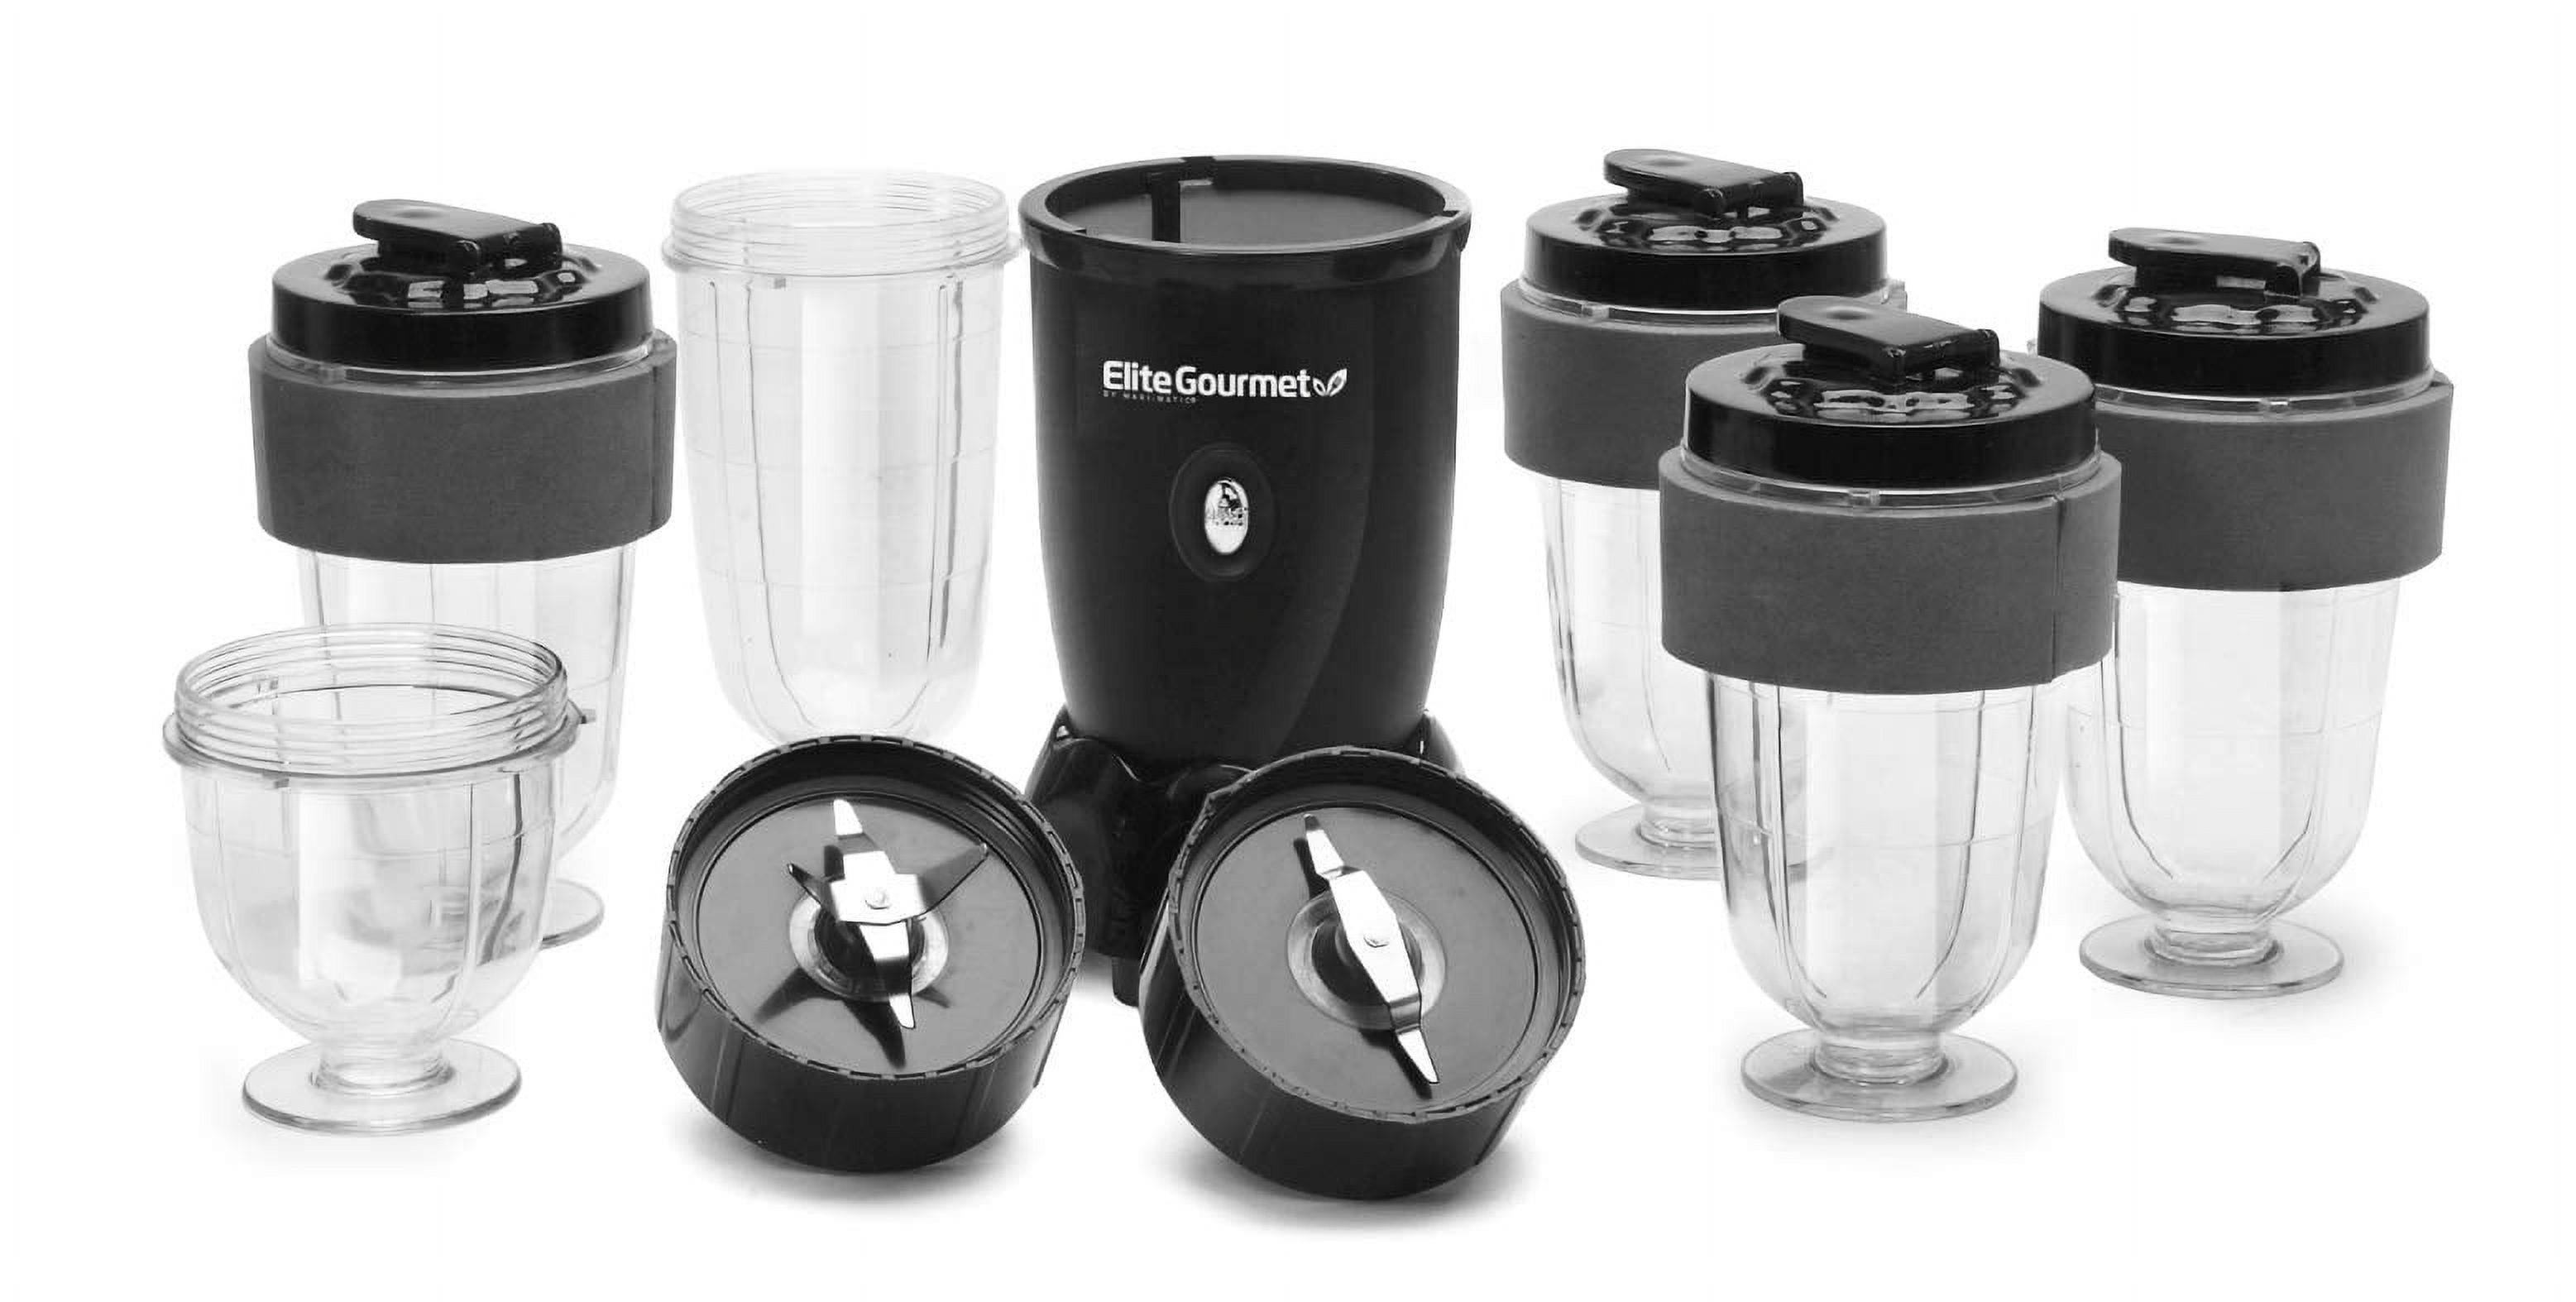 Maxi-Matic EPB-1800 Personal Drink Blender, 17 Piece, 300W, 16 Oz, Black - image 4 of 7